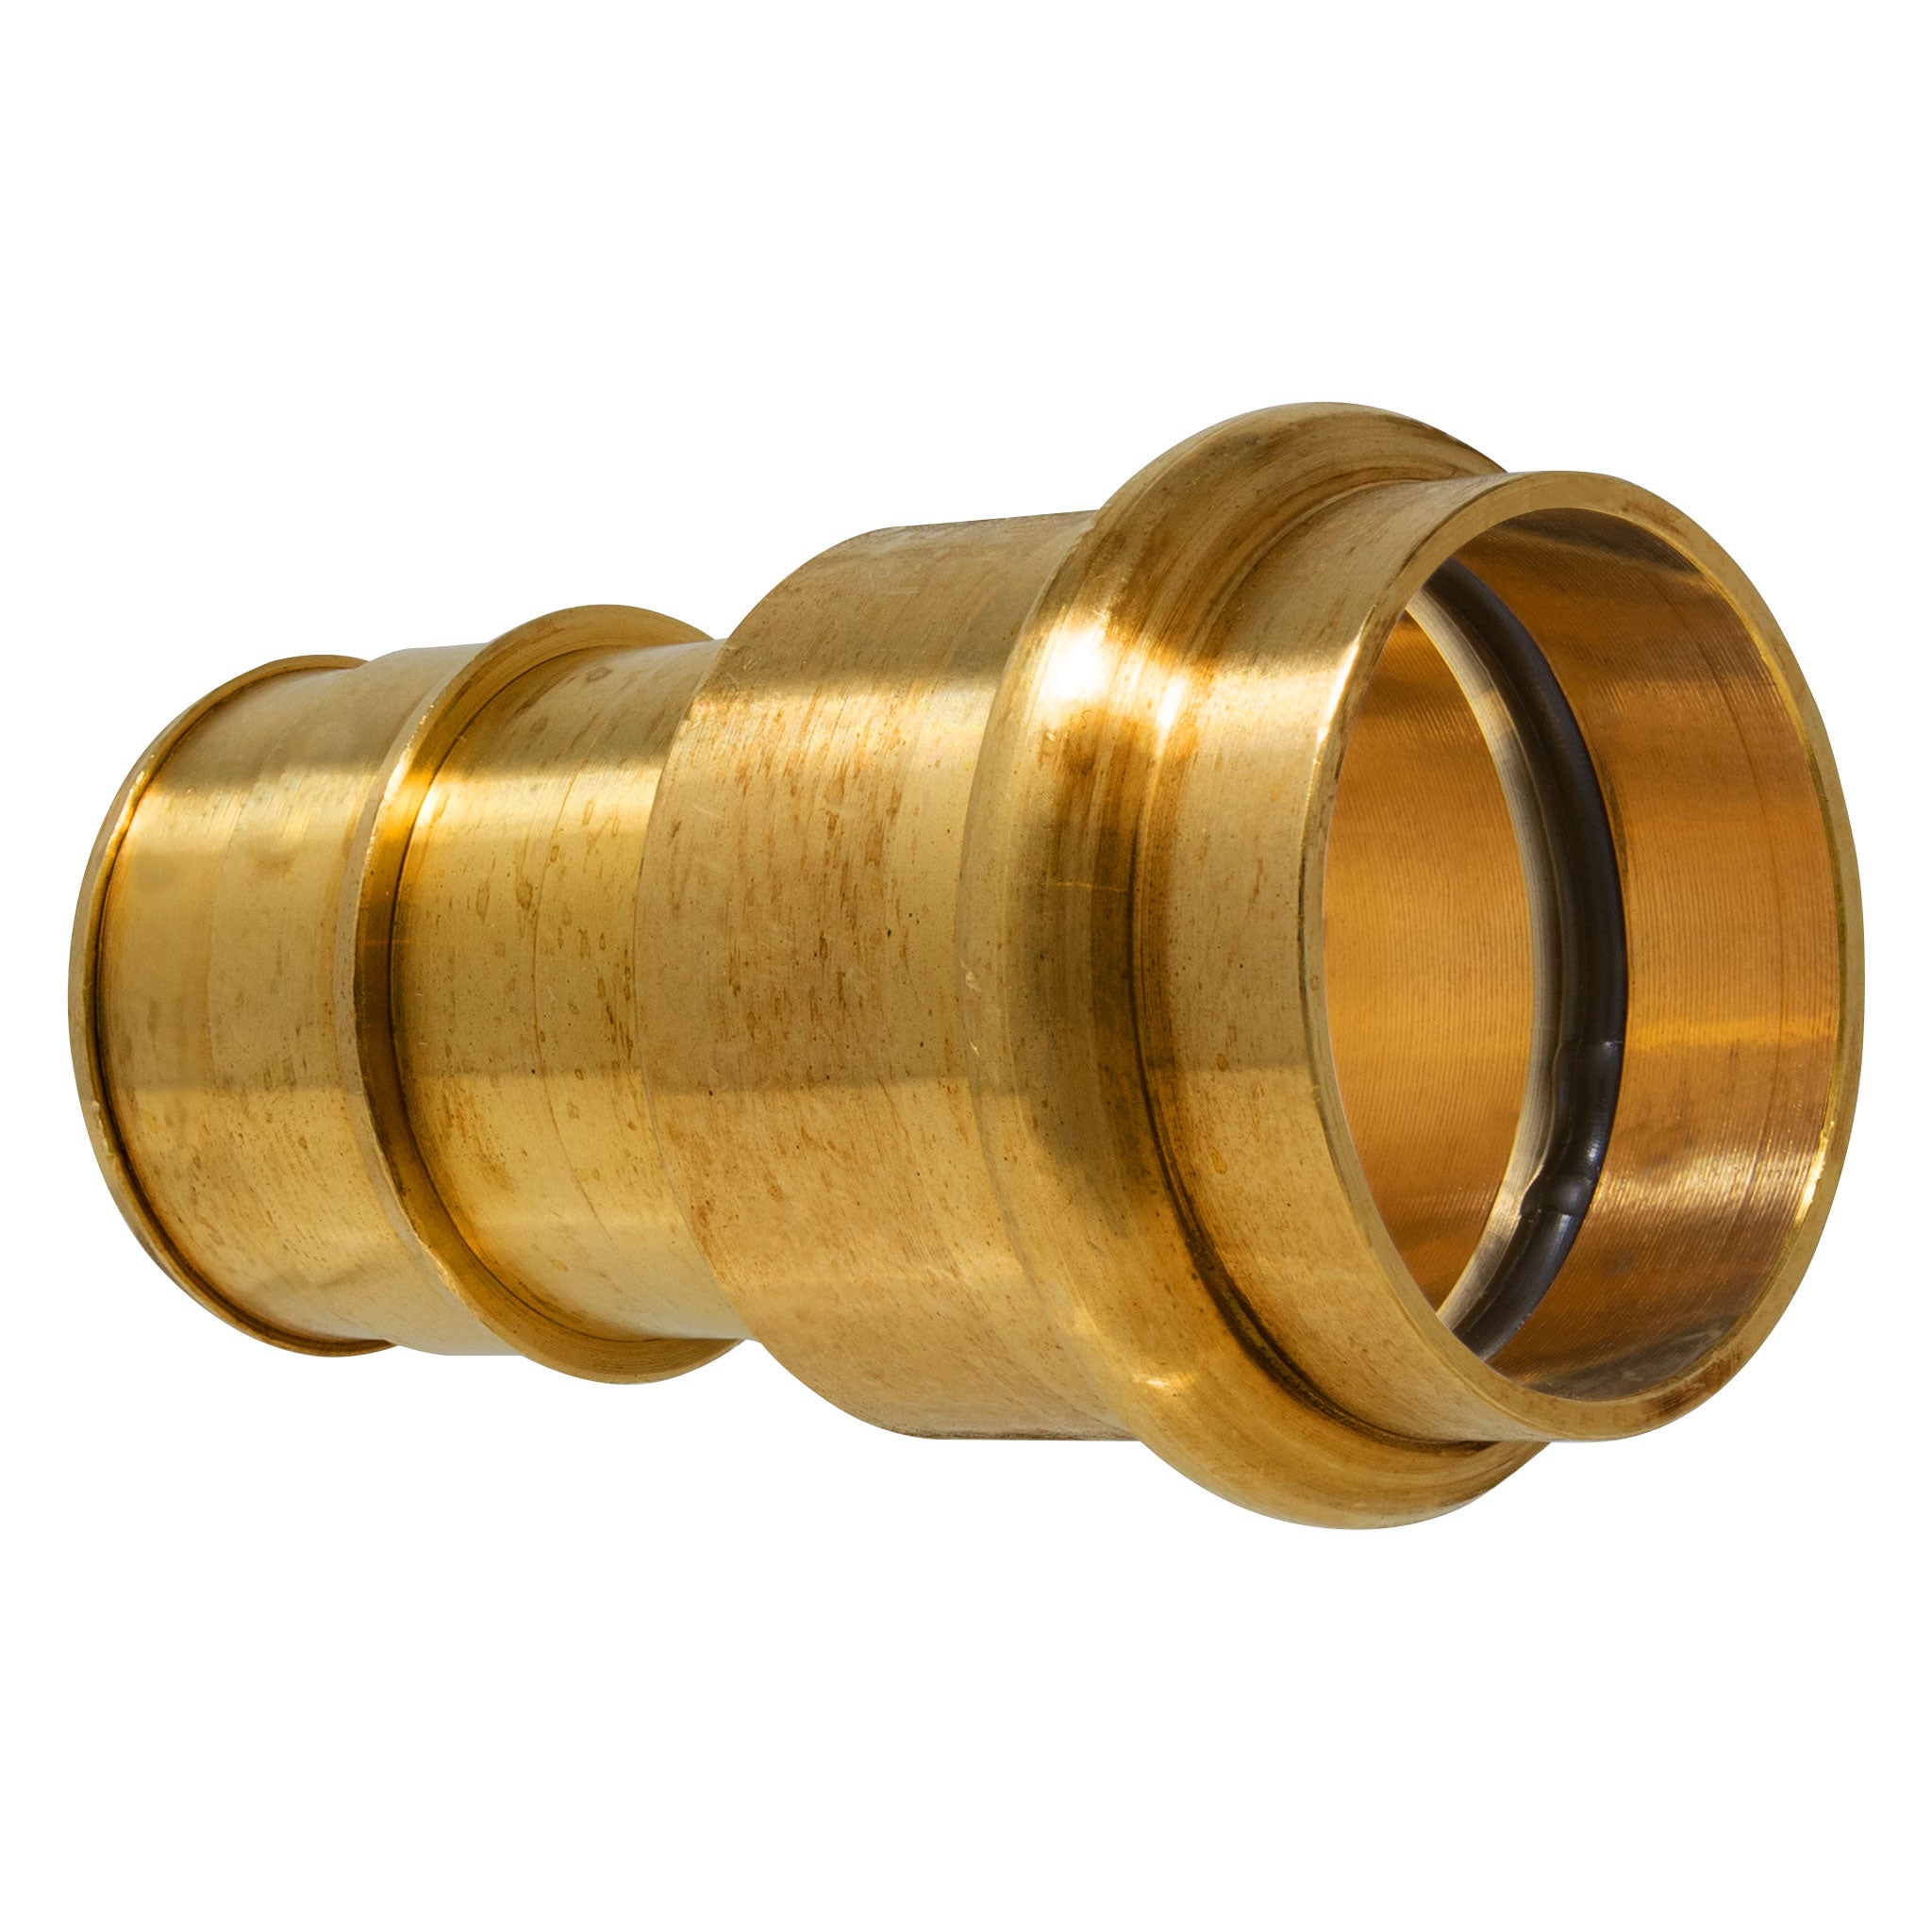 1/2" P x 1/2" PEX A (Expansion) Lead Free Brass Press Fitting Adapter F1960, ProPress Compatible